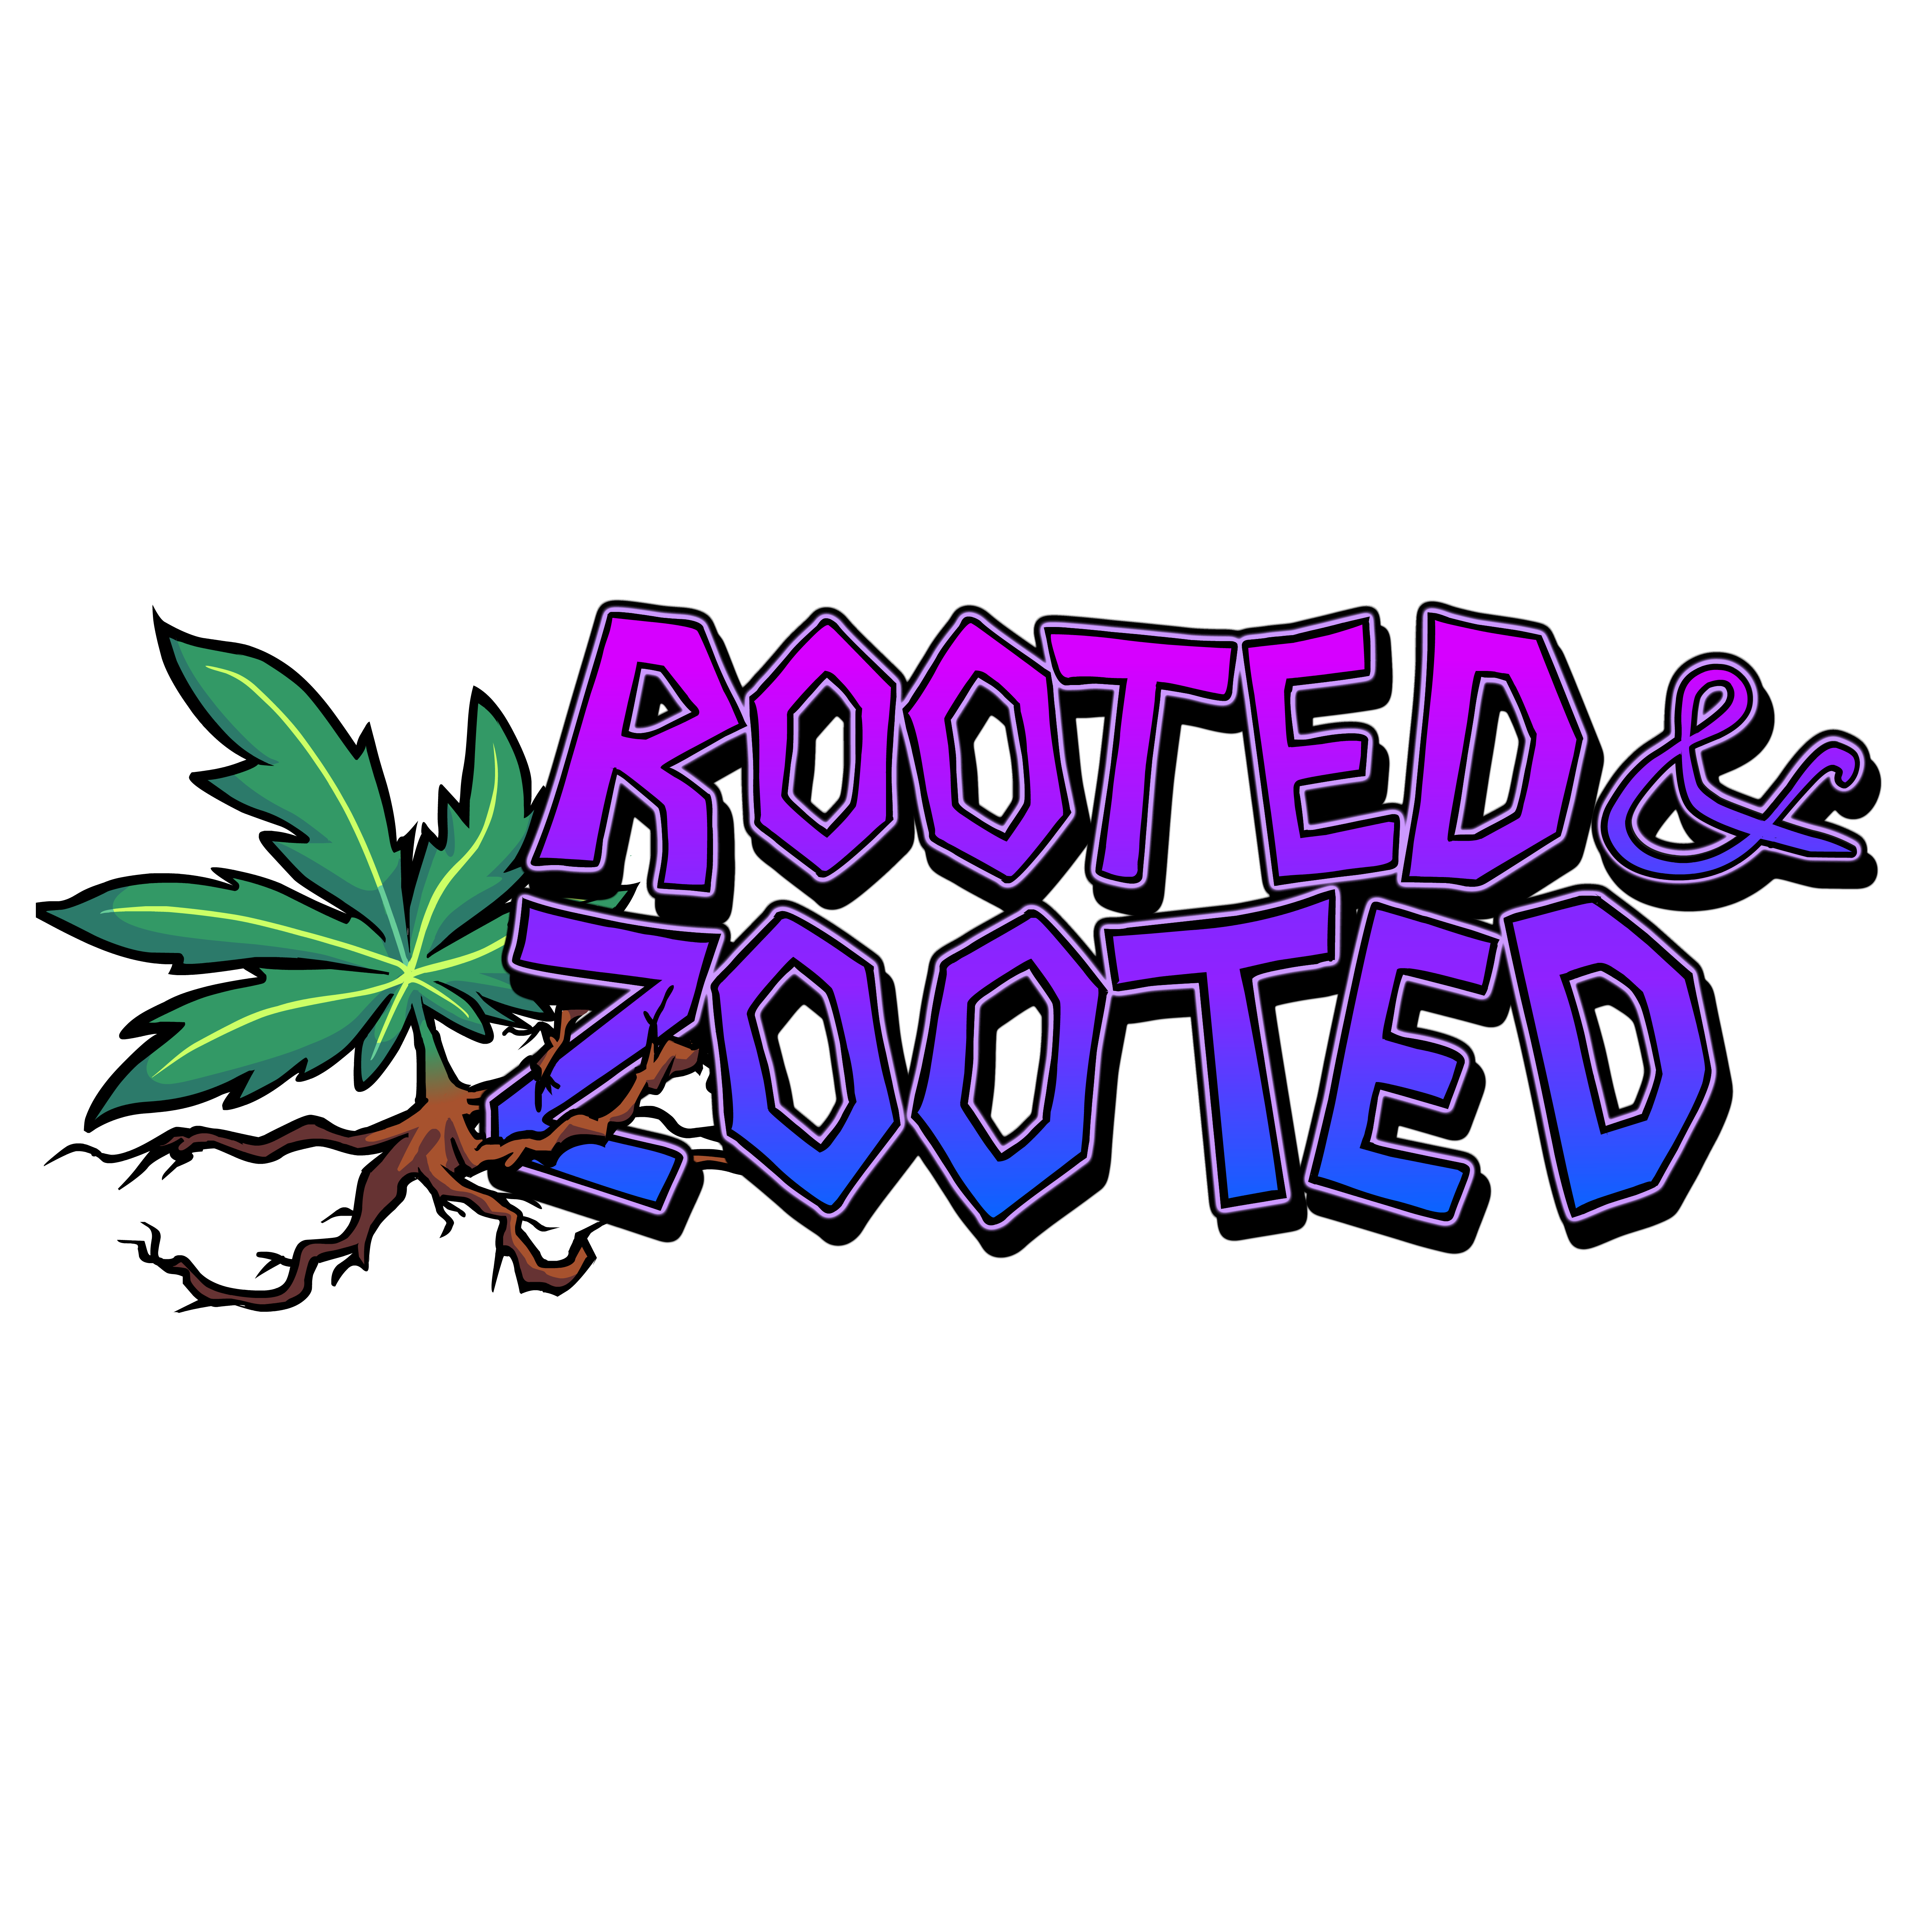 Rooted and Zooted Processing